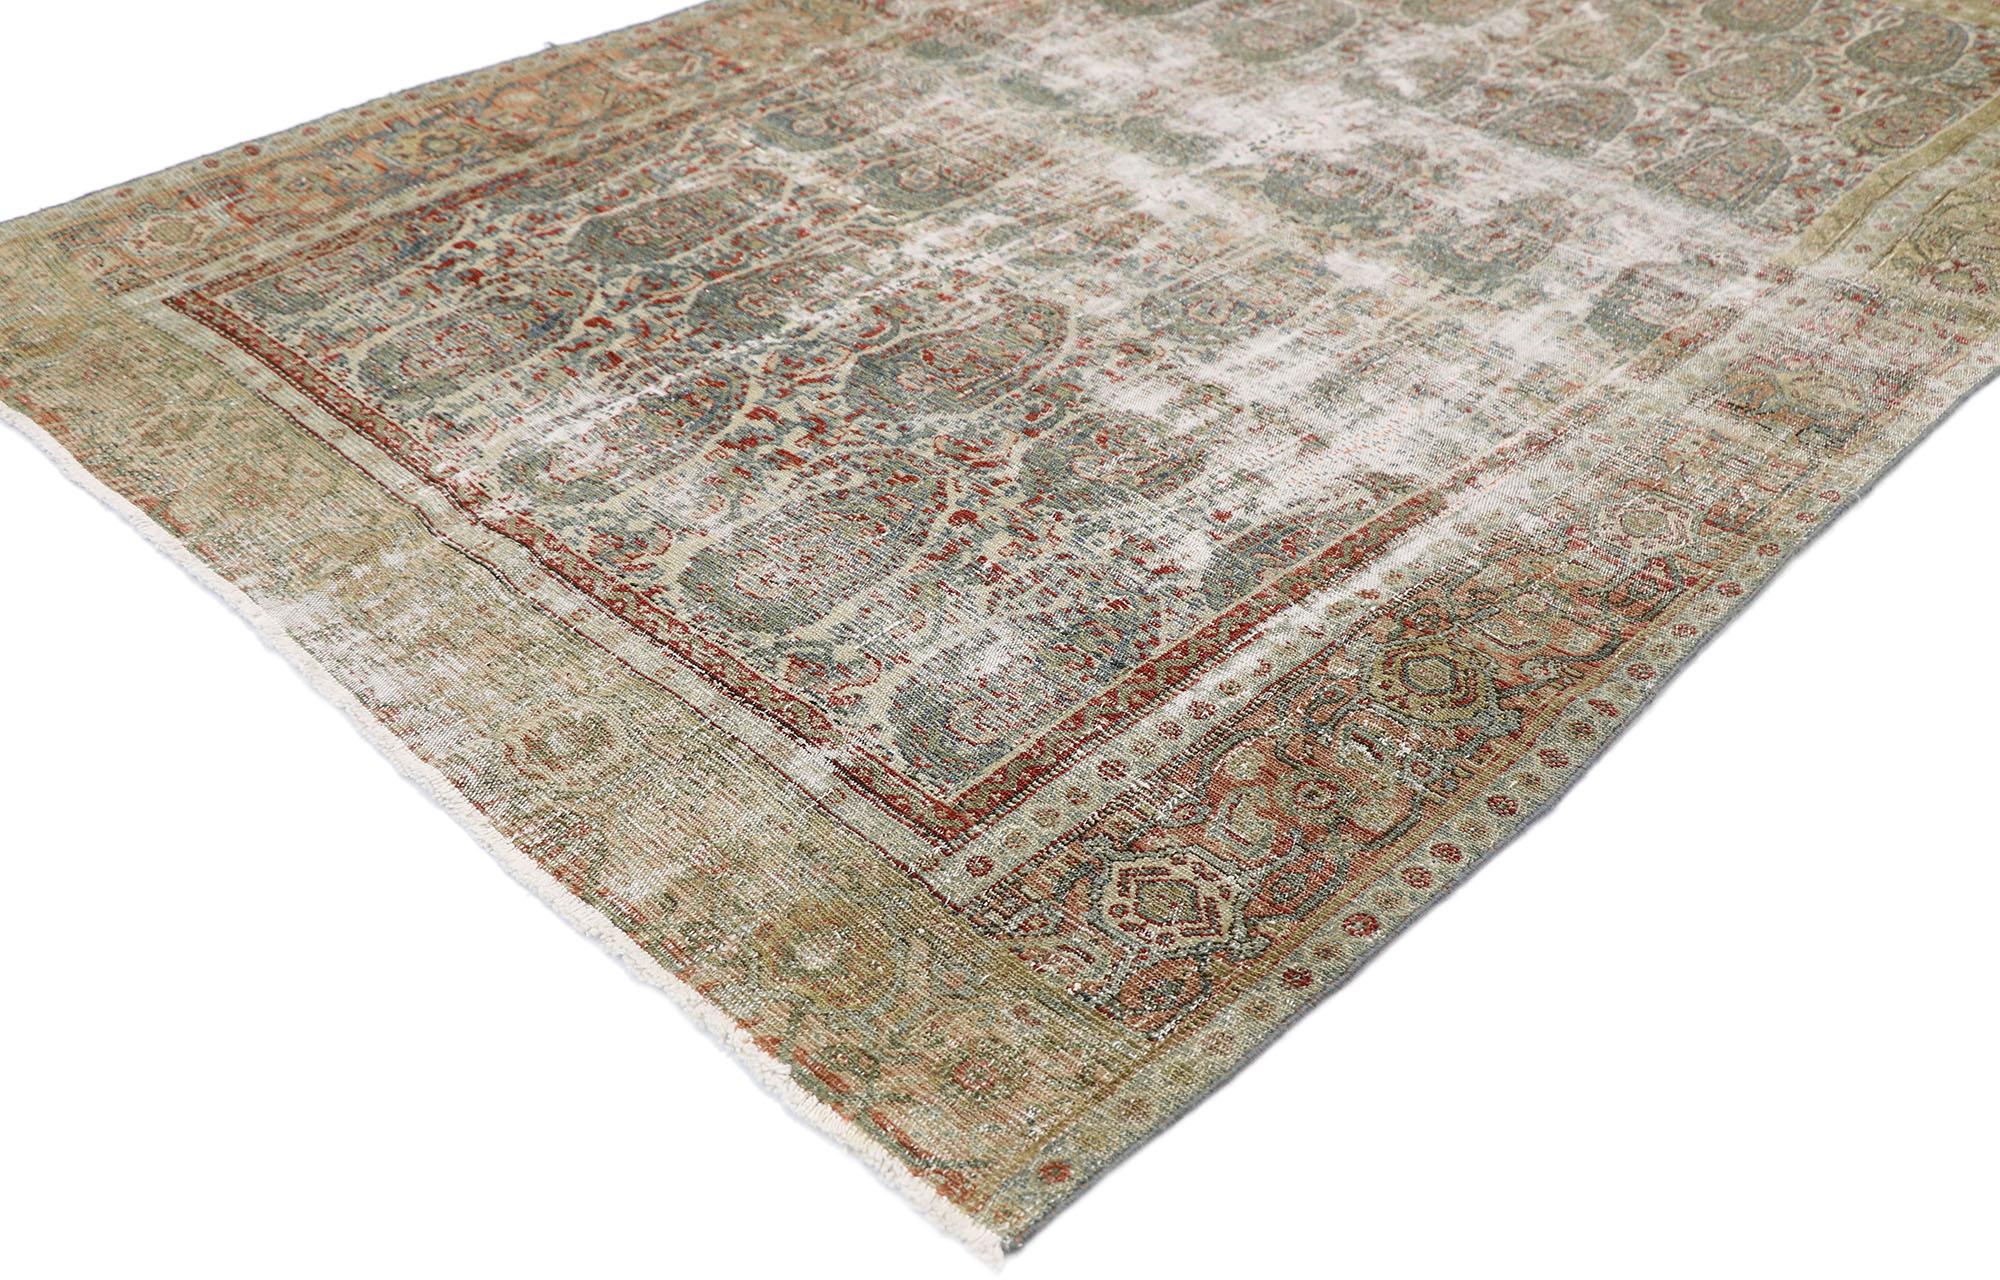 60818, distressed antique Persian Senneh Boteh Rug with Rustic Arts & Crafts style 04'01 x 06'04. Cleverly composed and distinctively well-balanced, this hand knotted wool distressed antique Persian Senneh boteh rug will take on a curated lived-in